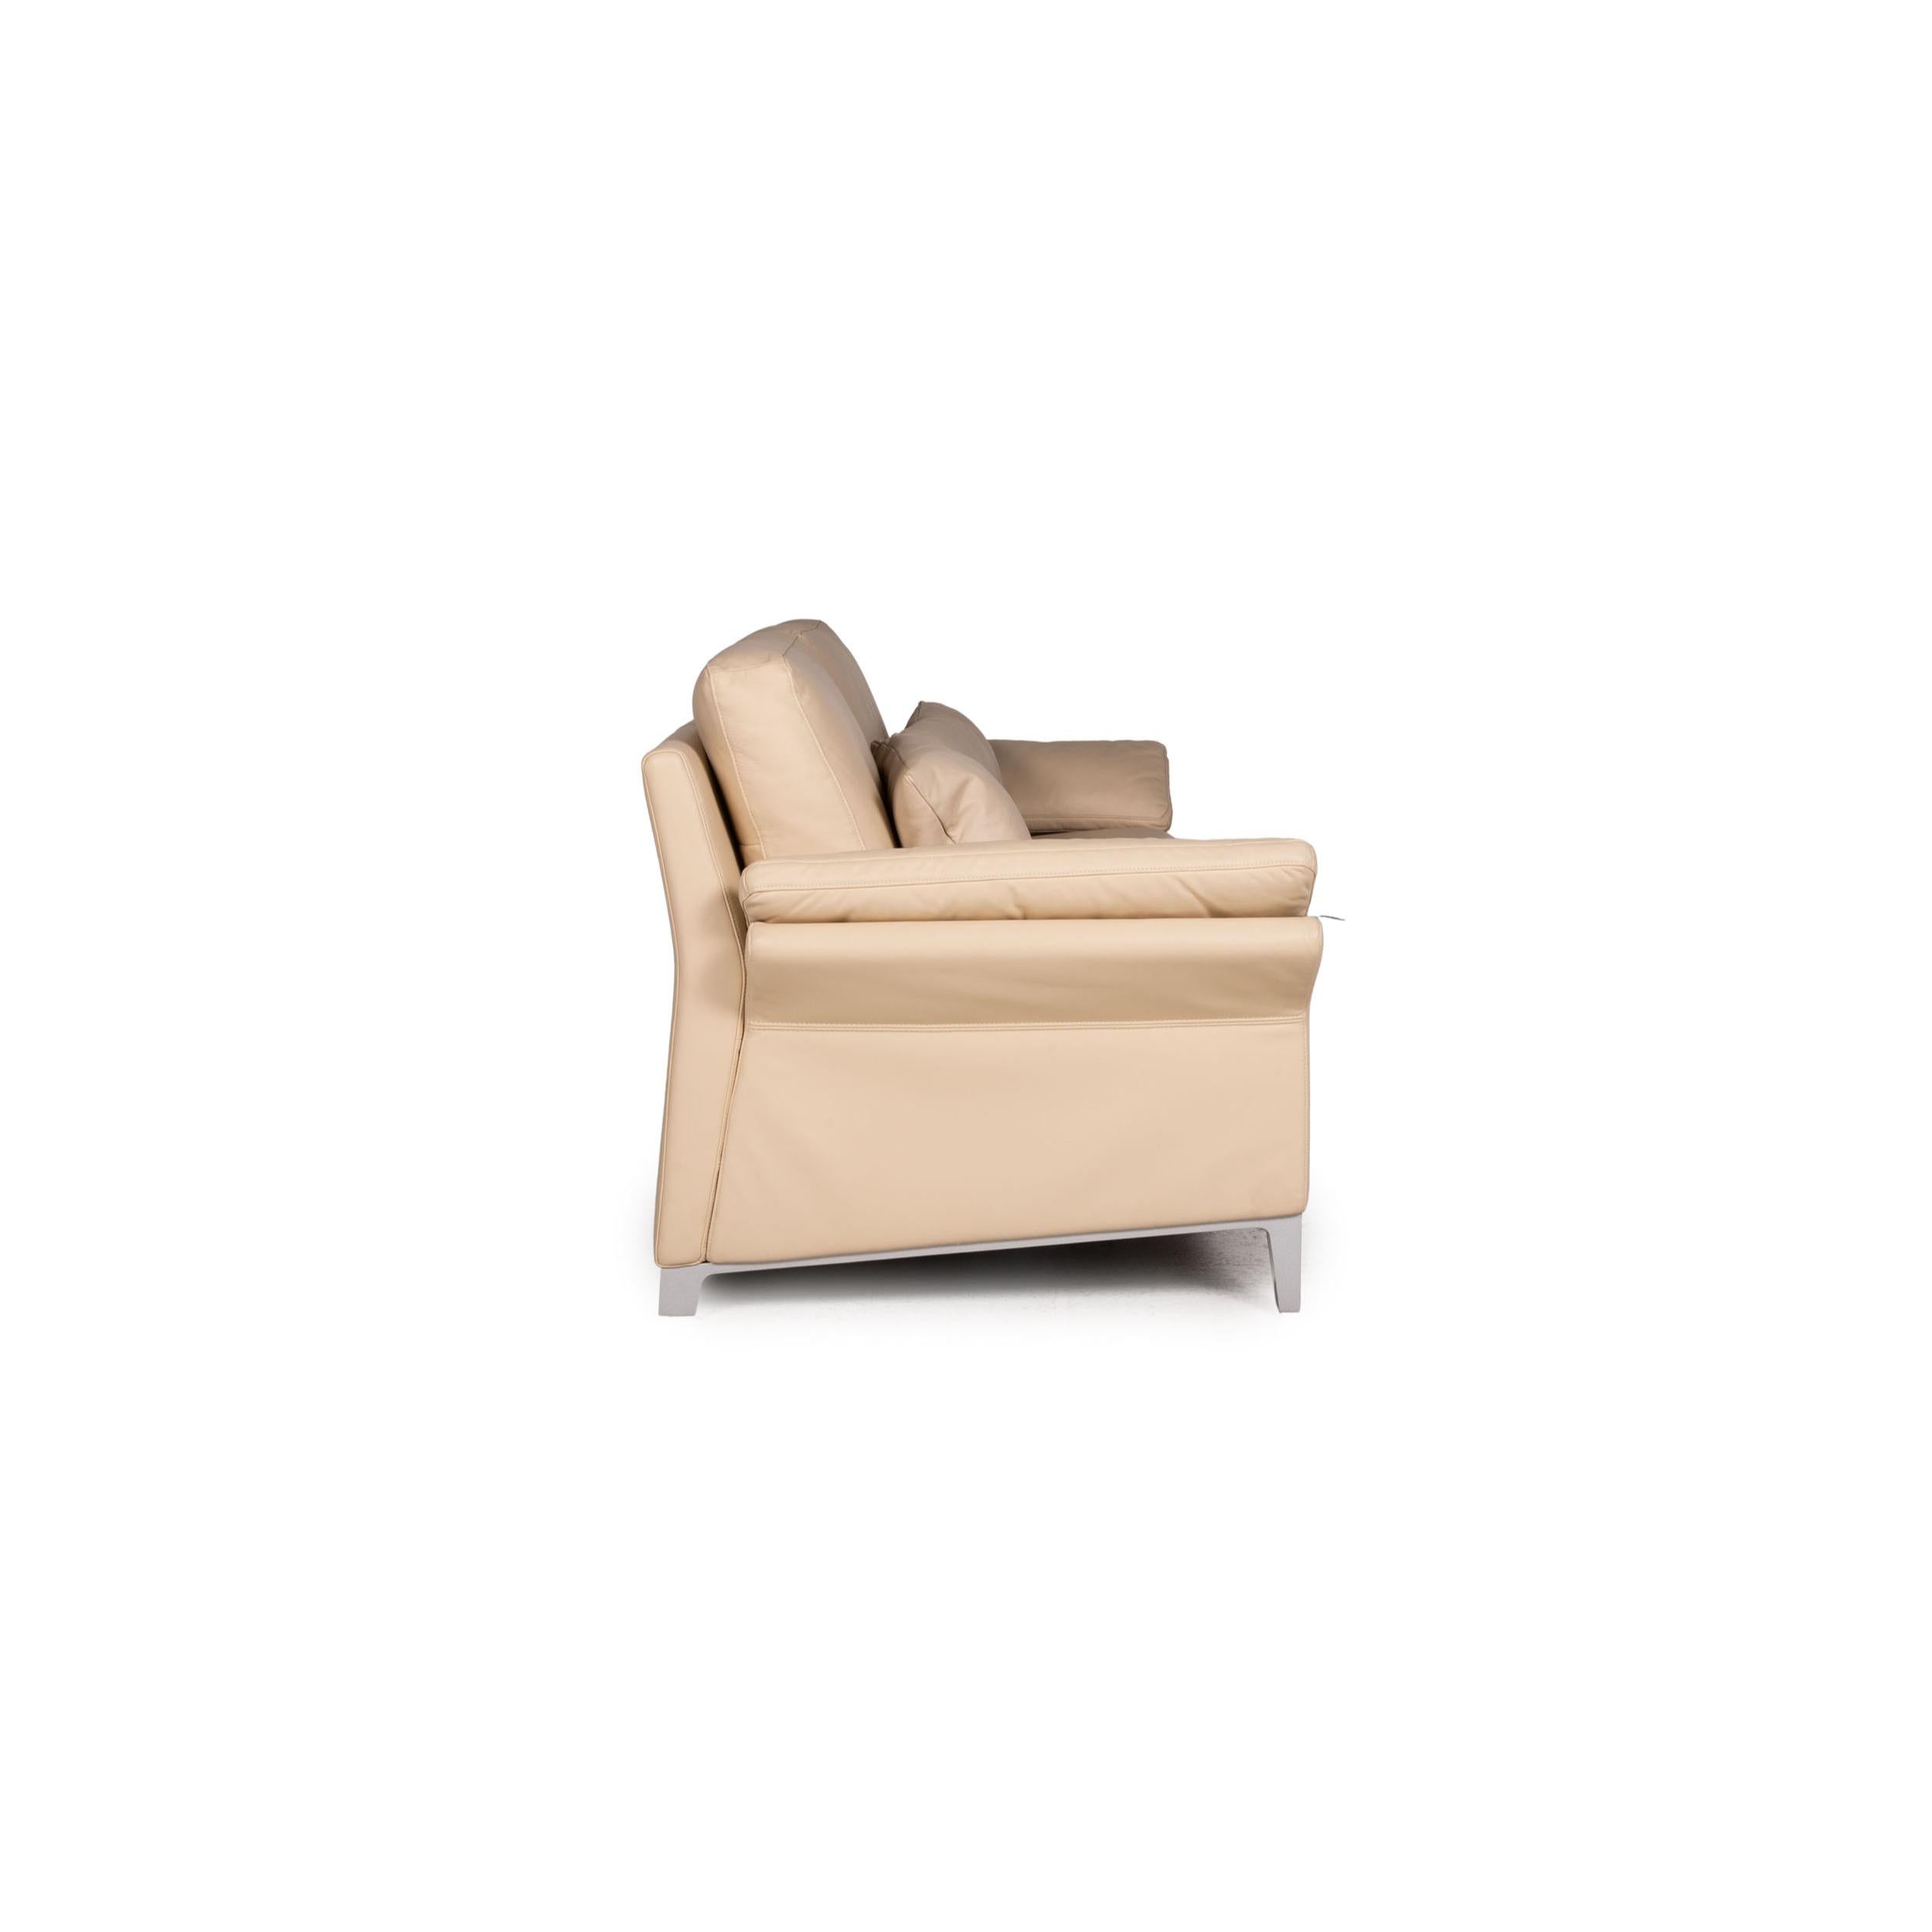 Rolf Benz 3300 Leather Sofa Cream Three-Seater Couch In Good Condition For Sale In Cologne, DE